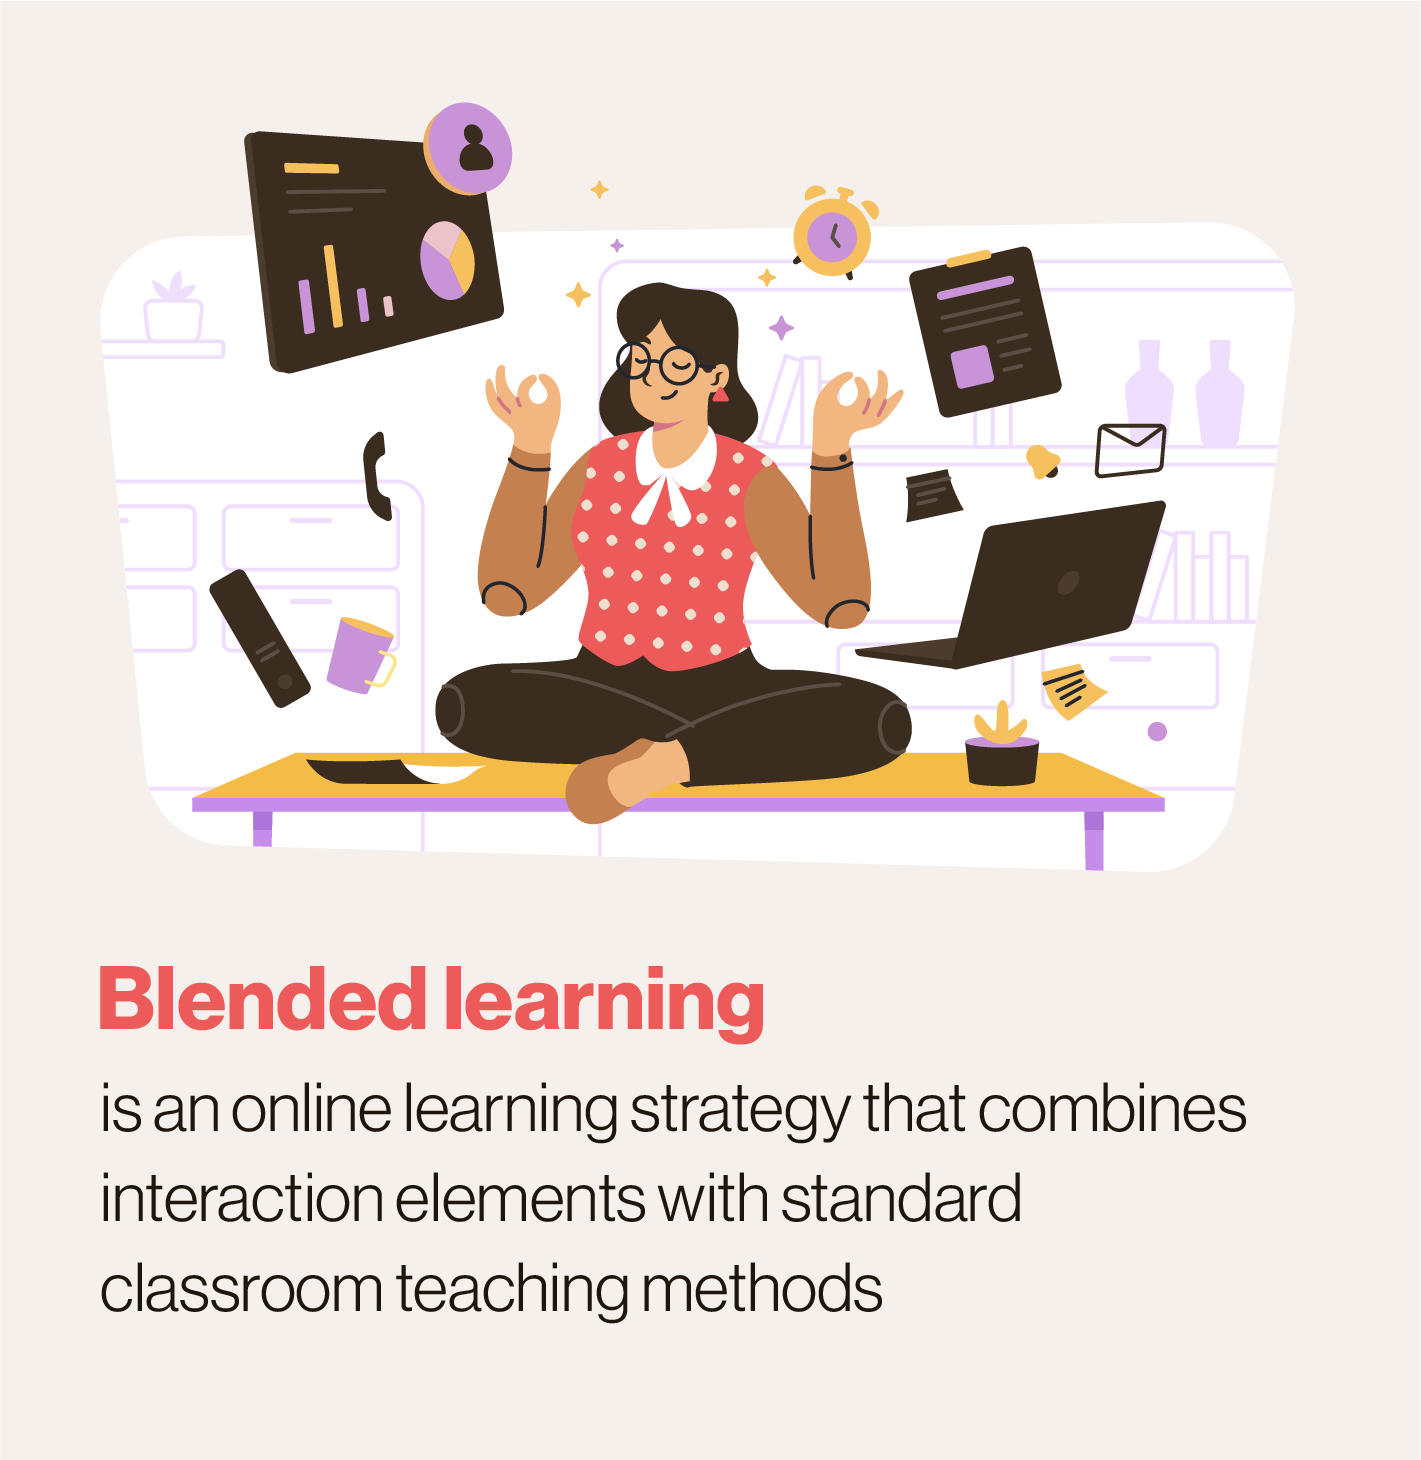 The definition of blended learning